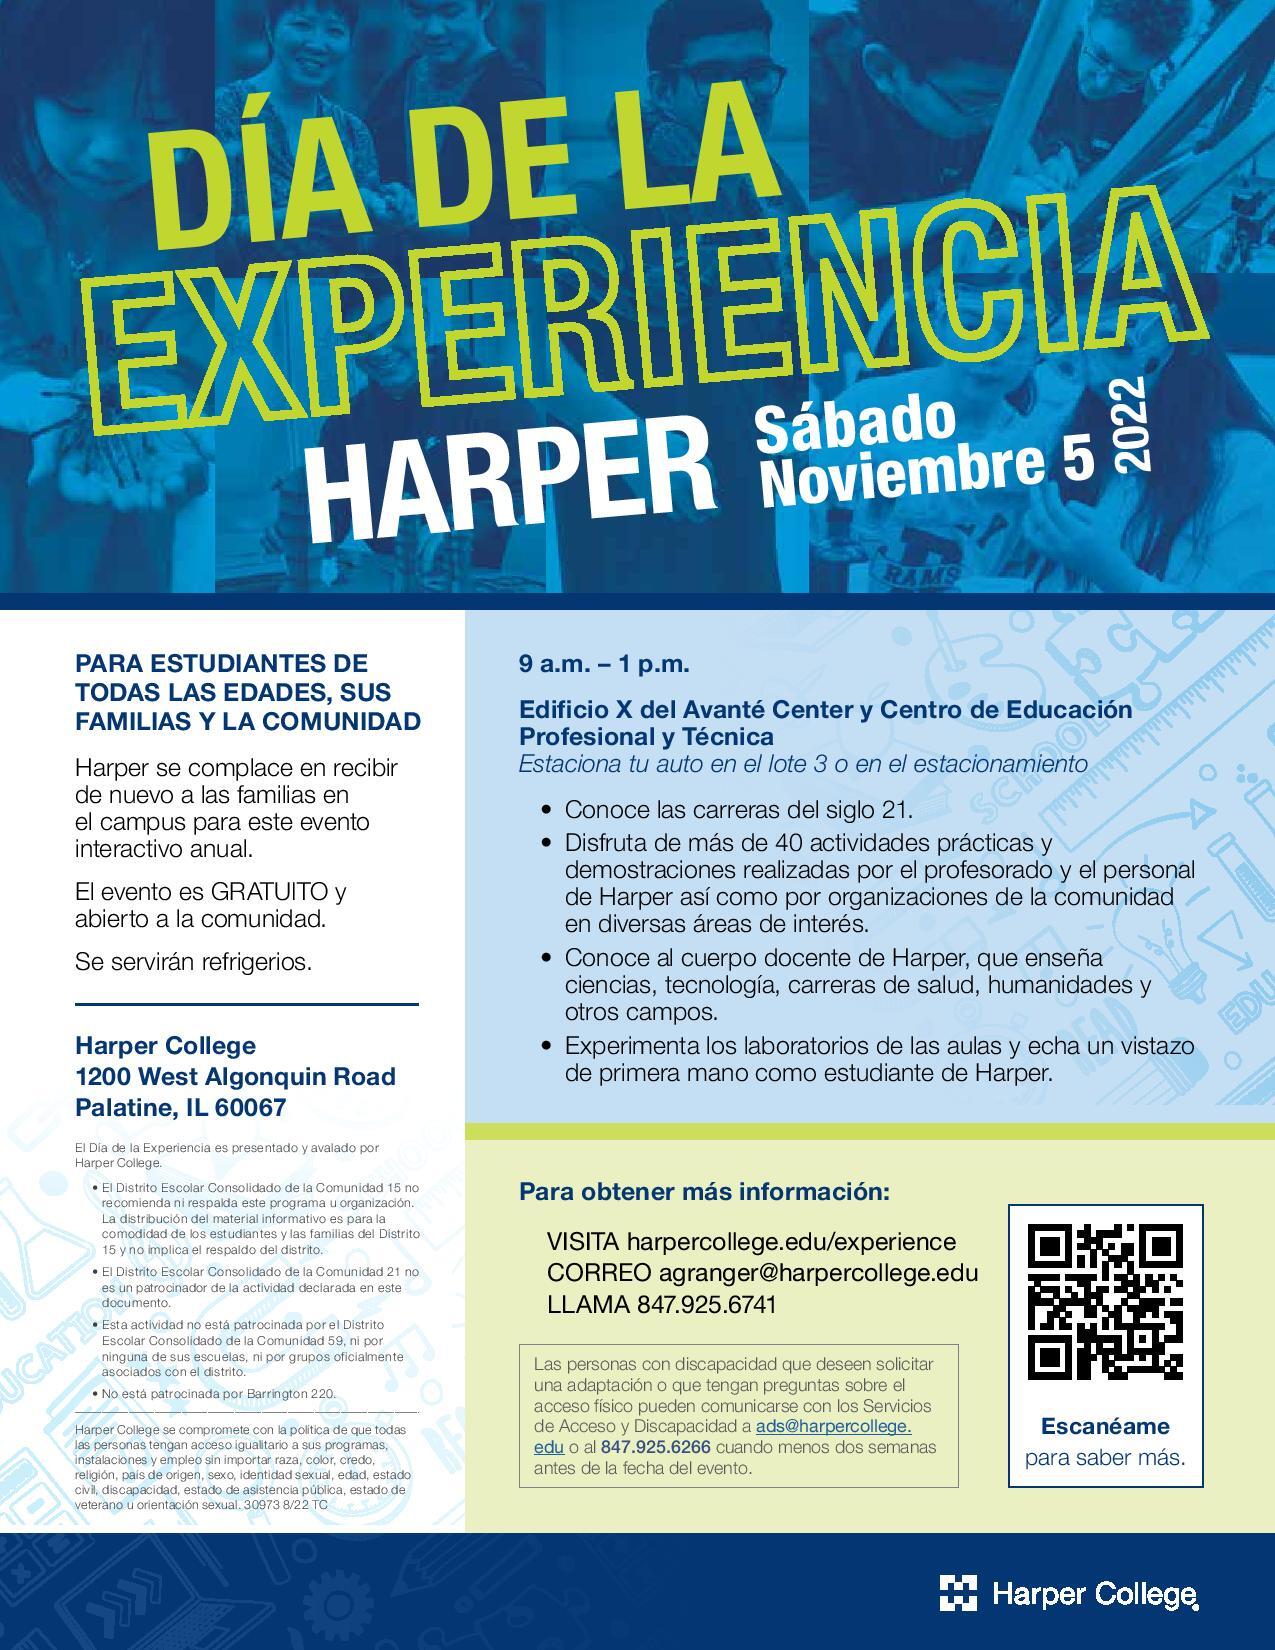 Harper College Experience Day on November 5